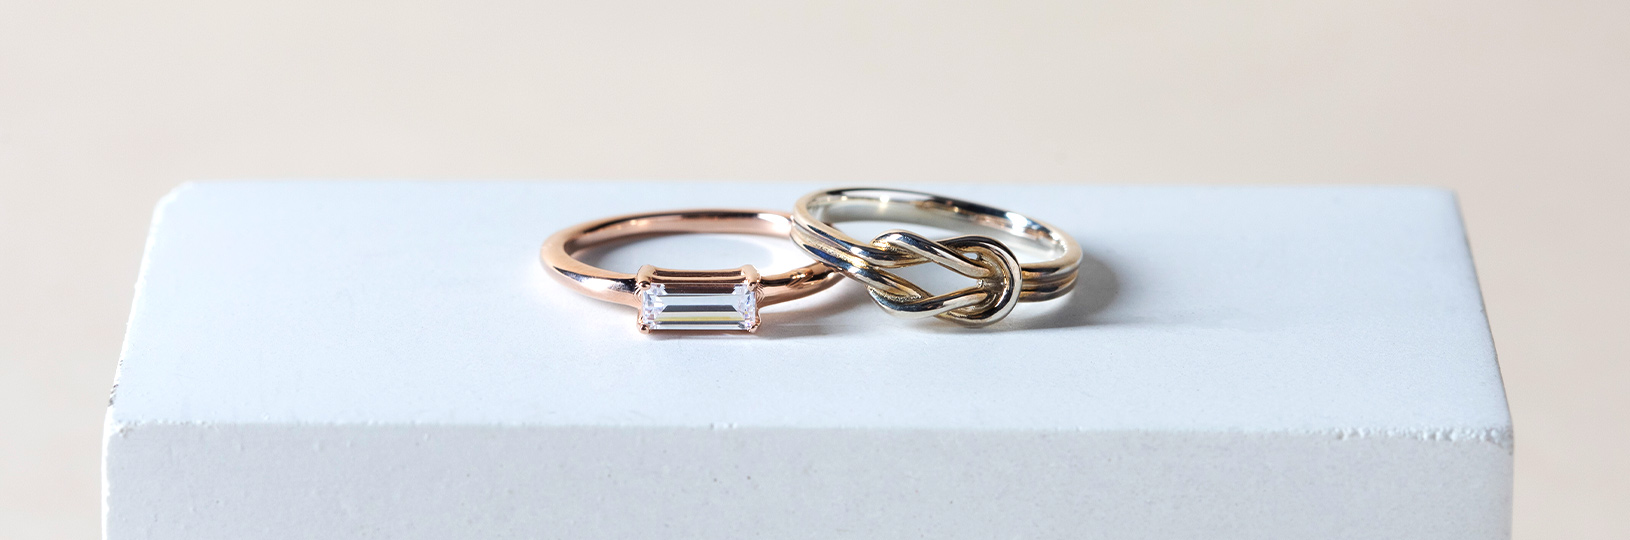 What Finger Do You Wear a Promise Ring On? | LoveToKnow